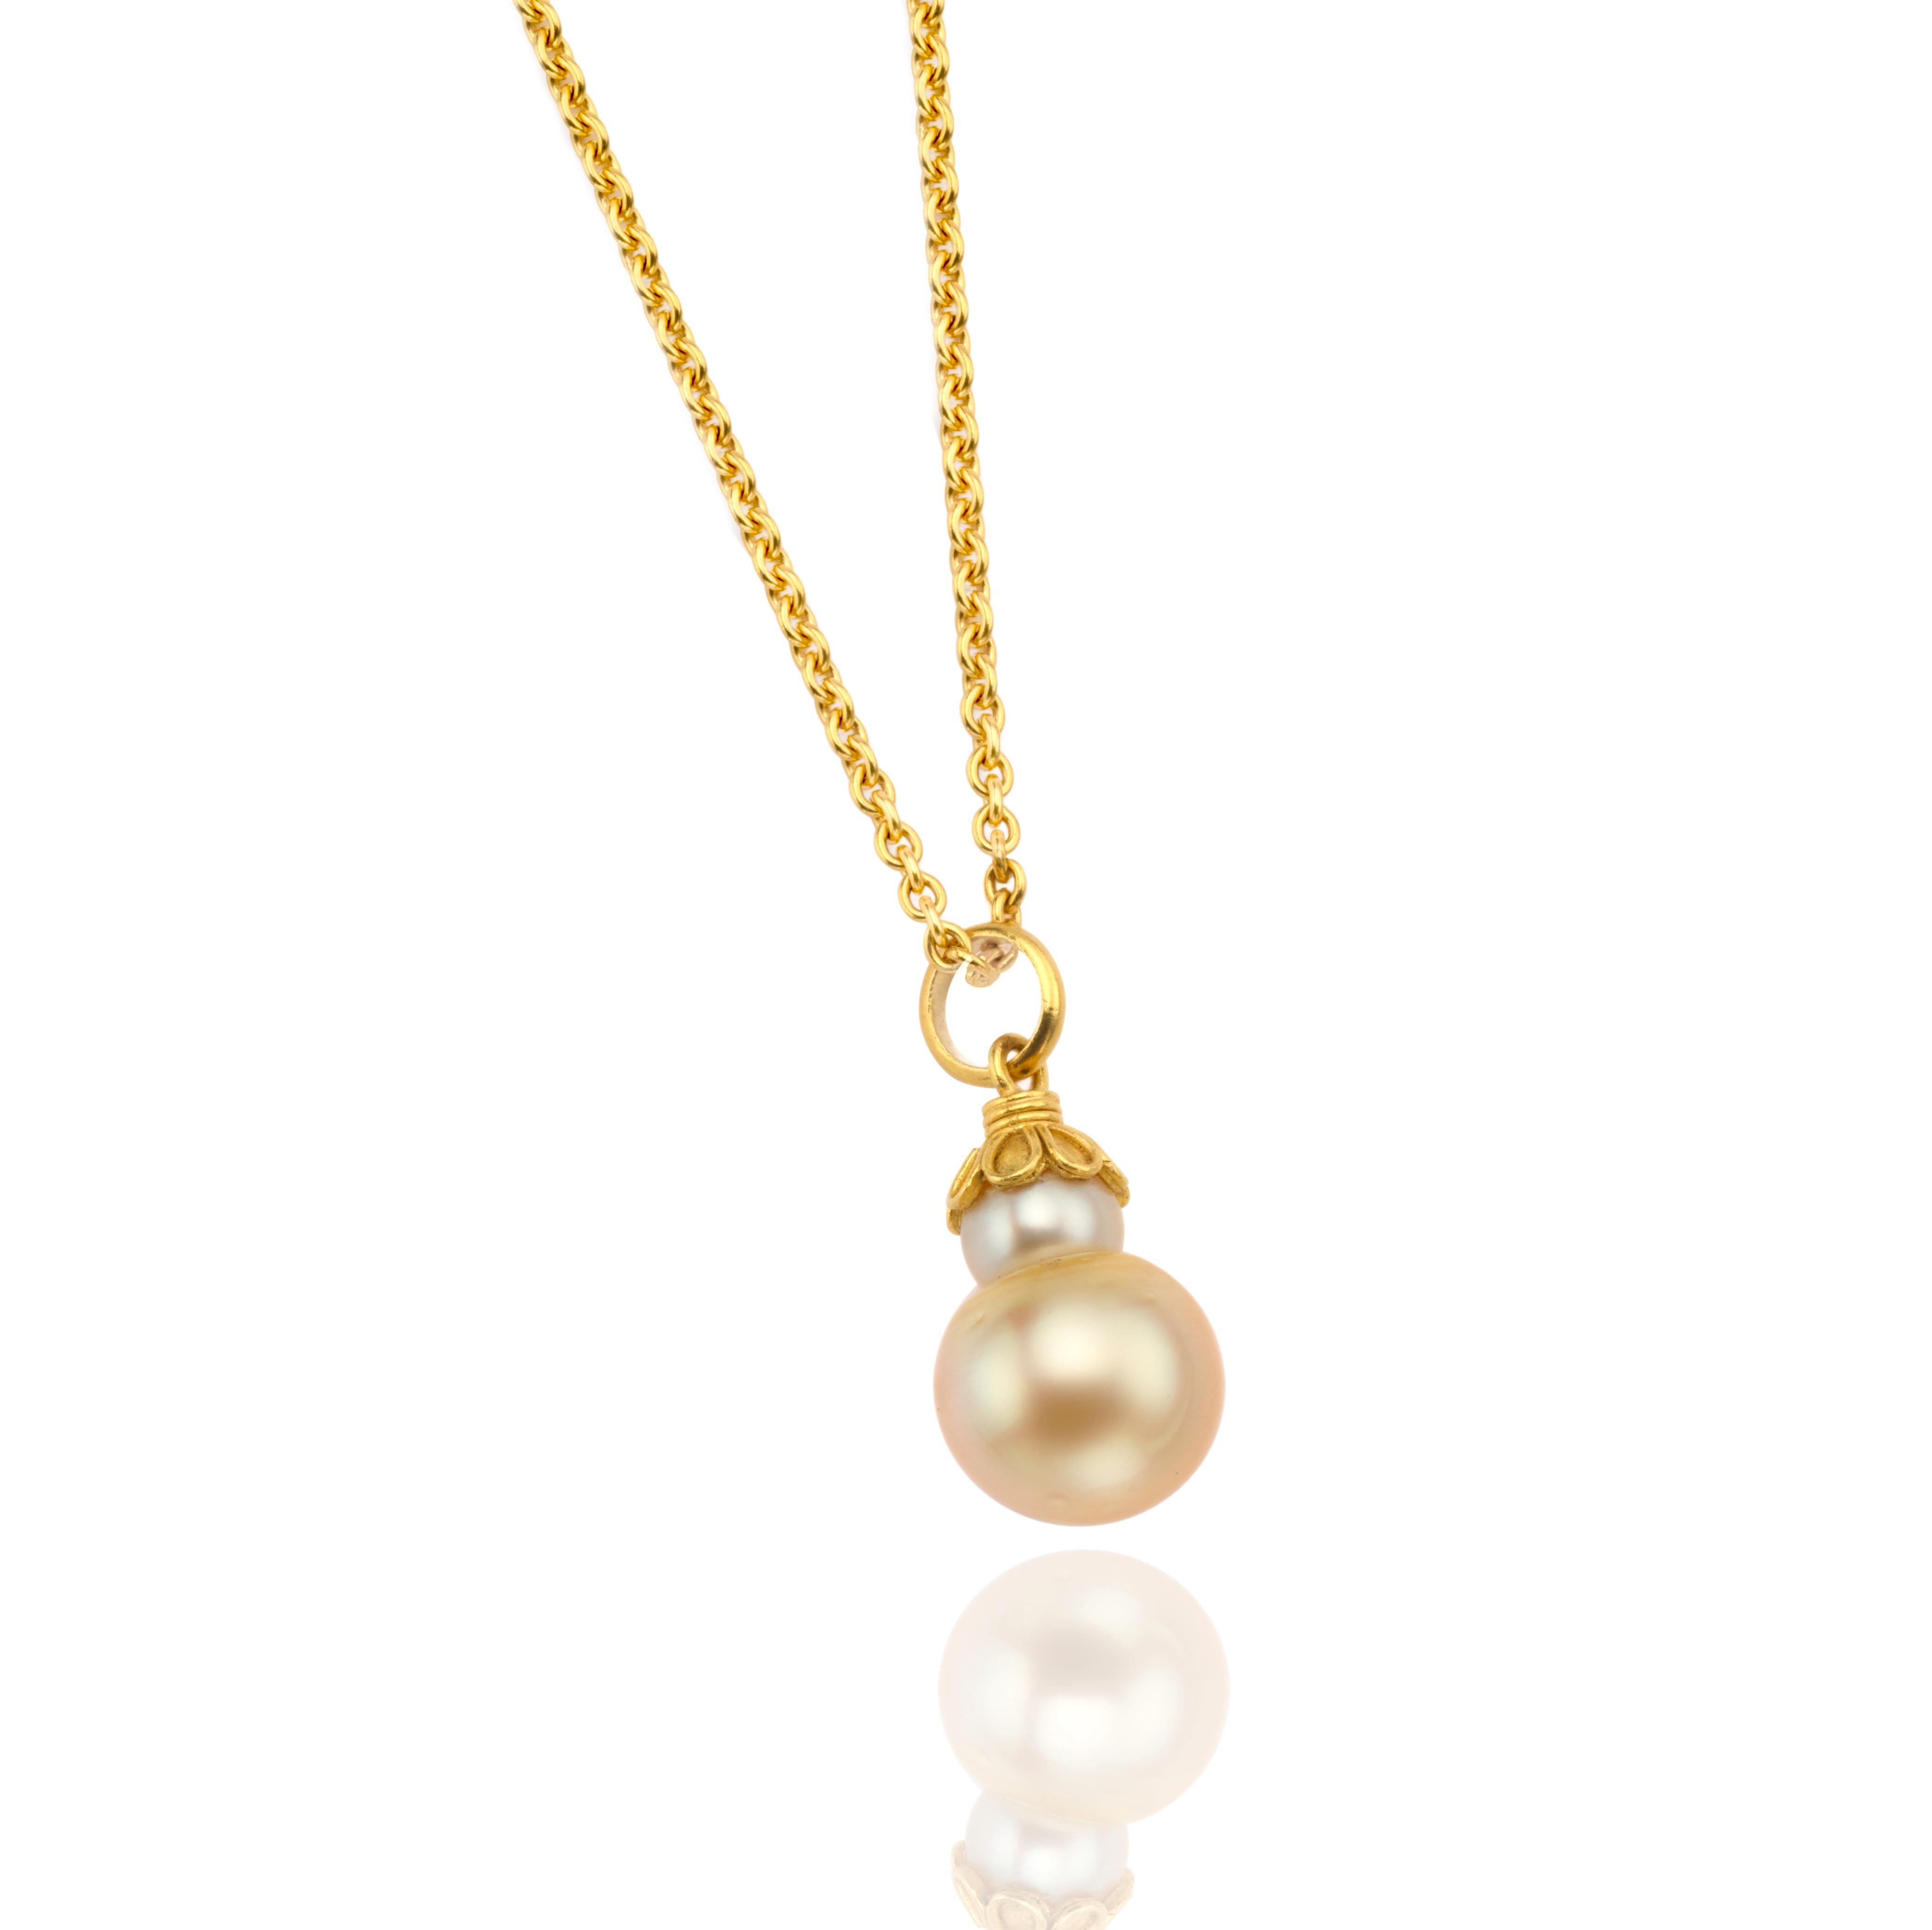 Very lovely double Golden South Sea pearl mounted in 22 karat gold cap. Being the most rare and sought after, South Sea pearls are known for their incredible size and beautiful satin lustre. The pearl measures 13mm in diameter. Shown on small 22